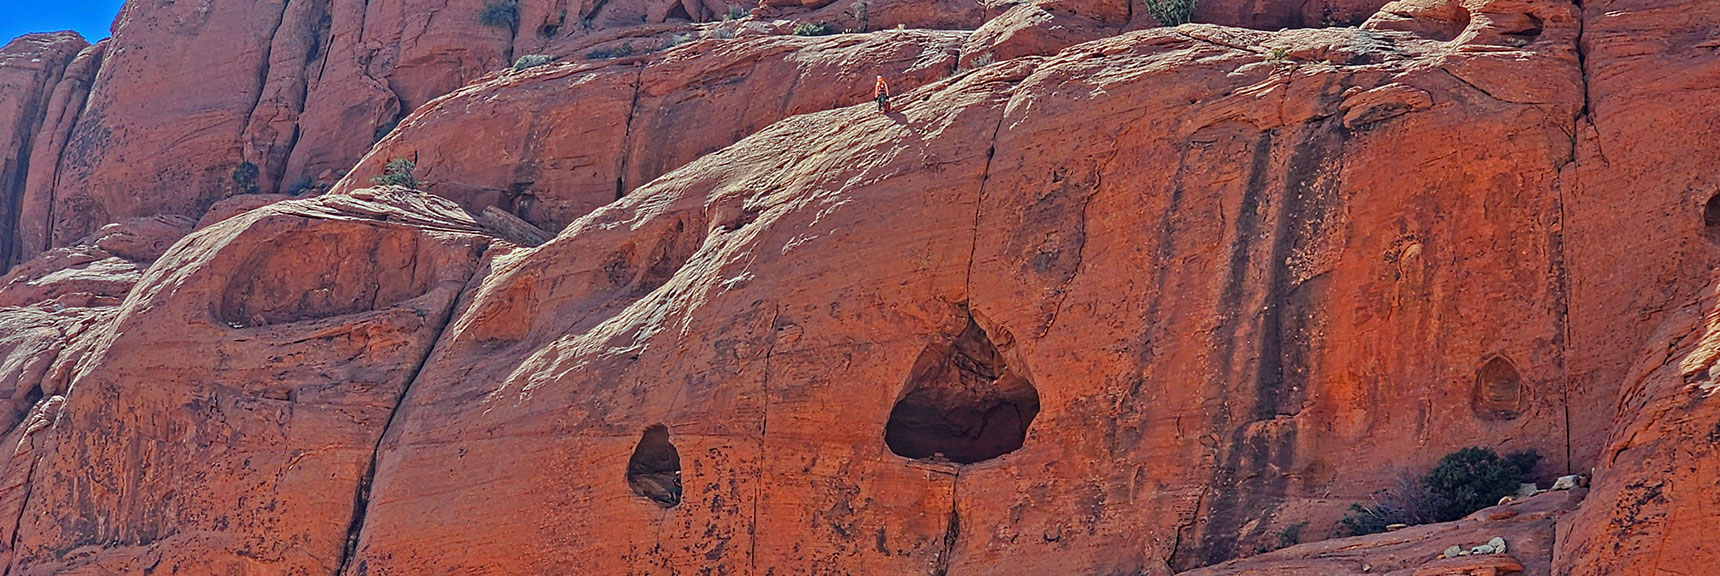 Closer View of Rock Climbers. Descending by Rope to Openings Below. | Pink Goblin Loop | Calico Basin, Nevada